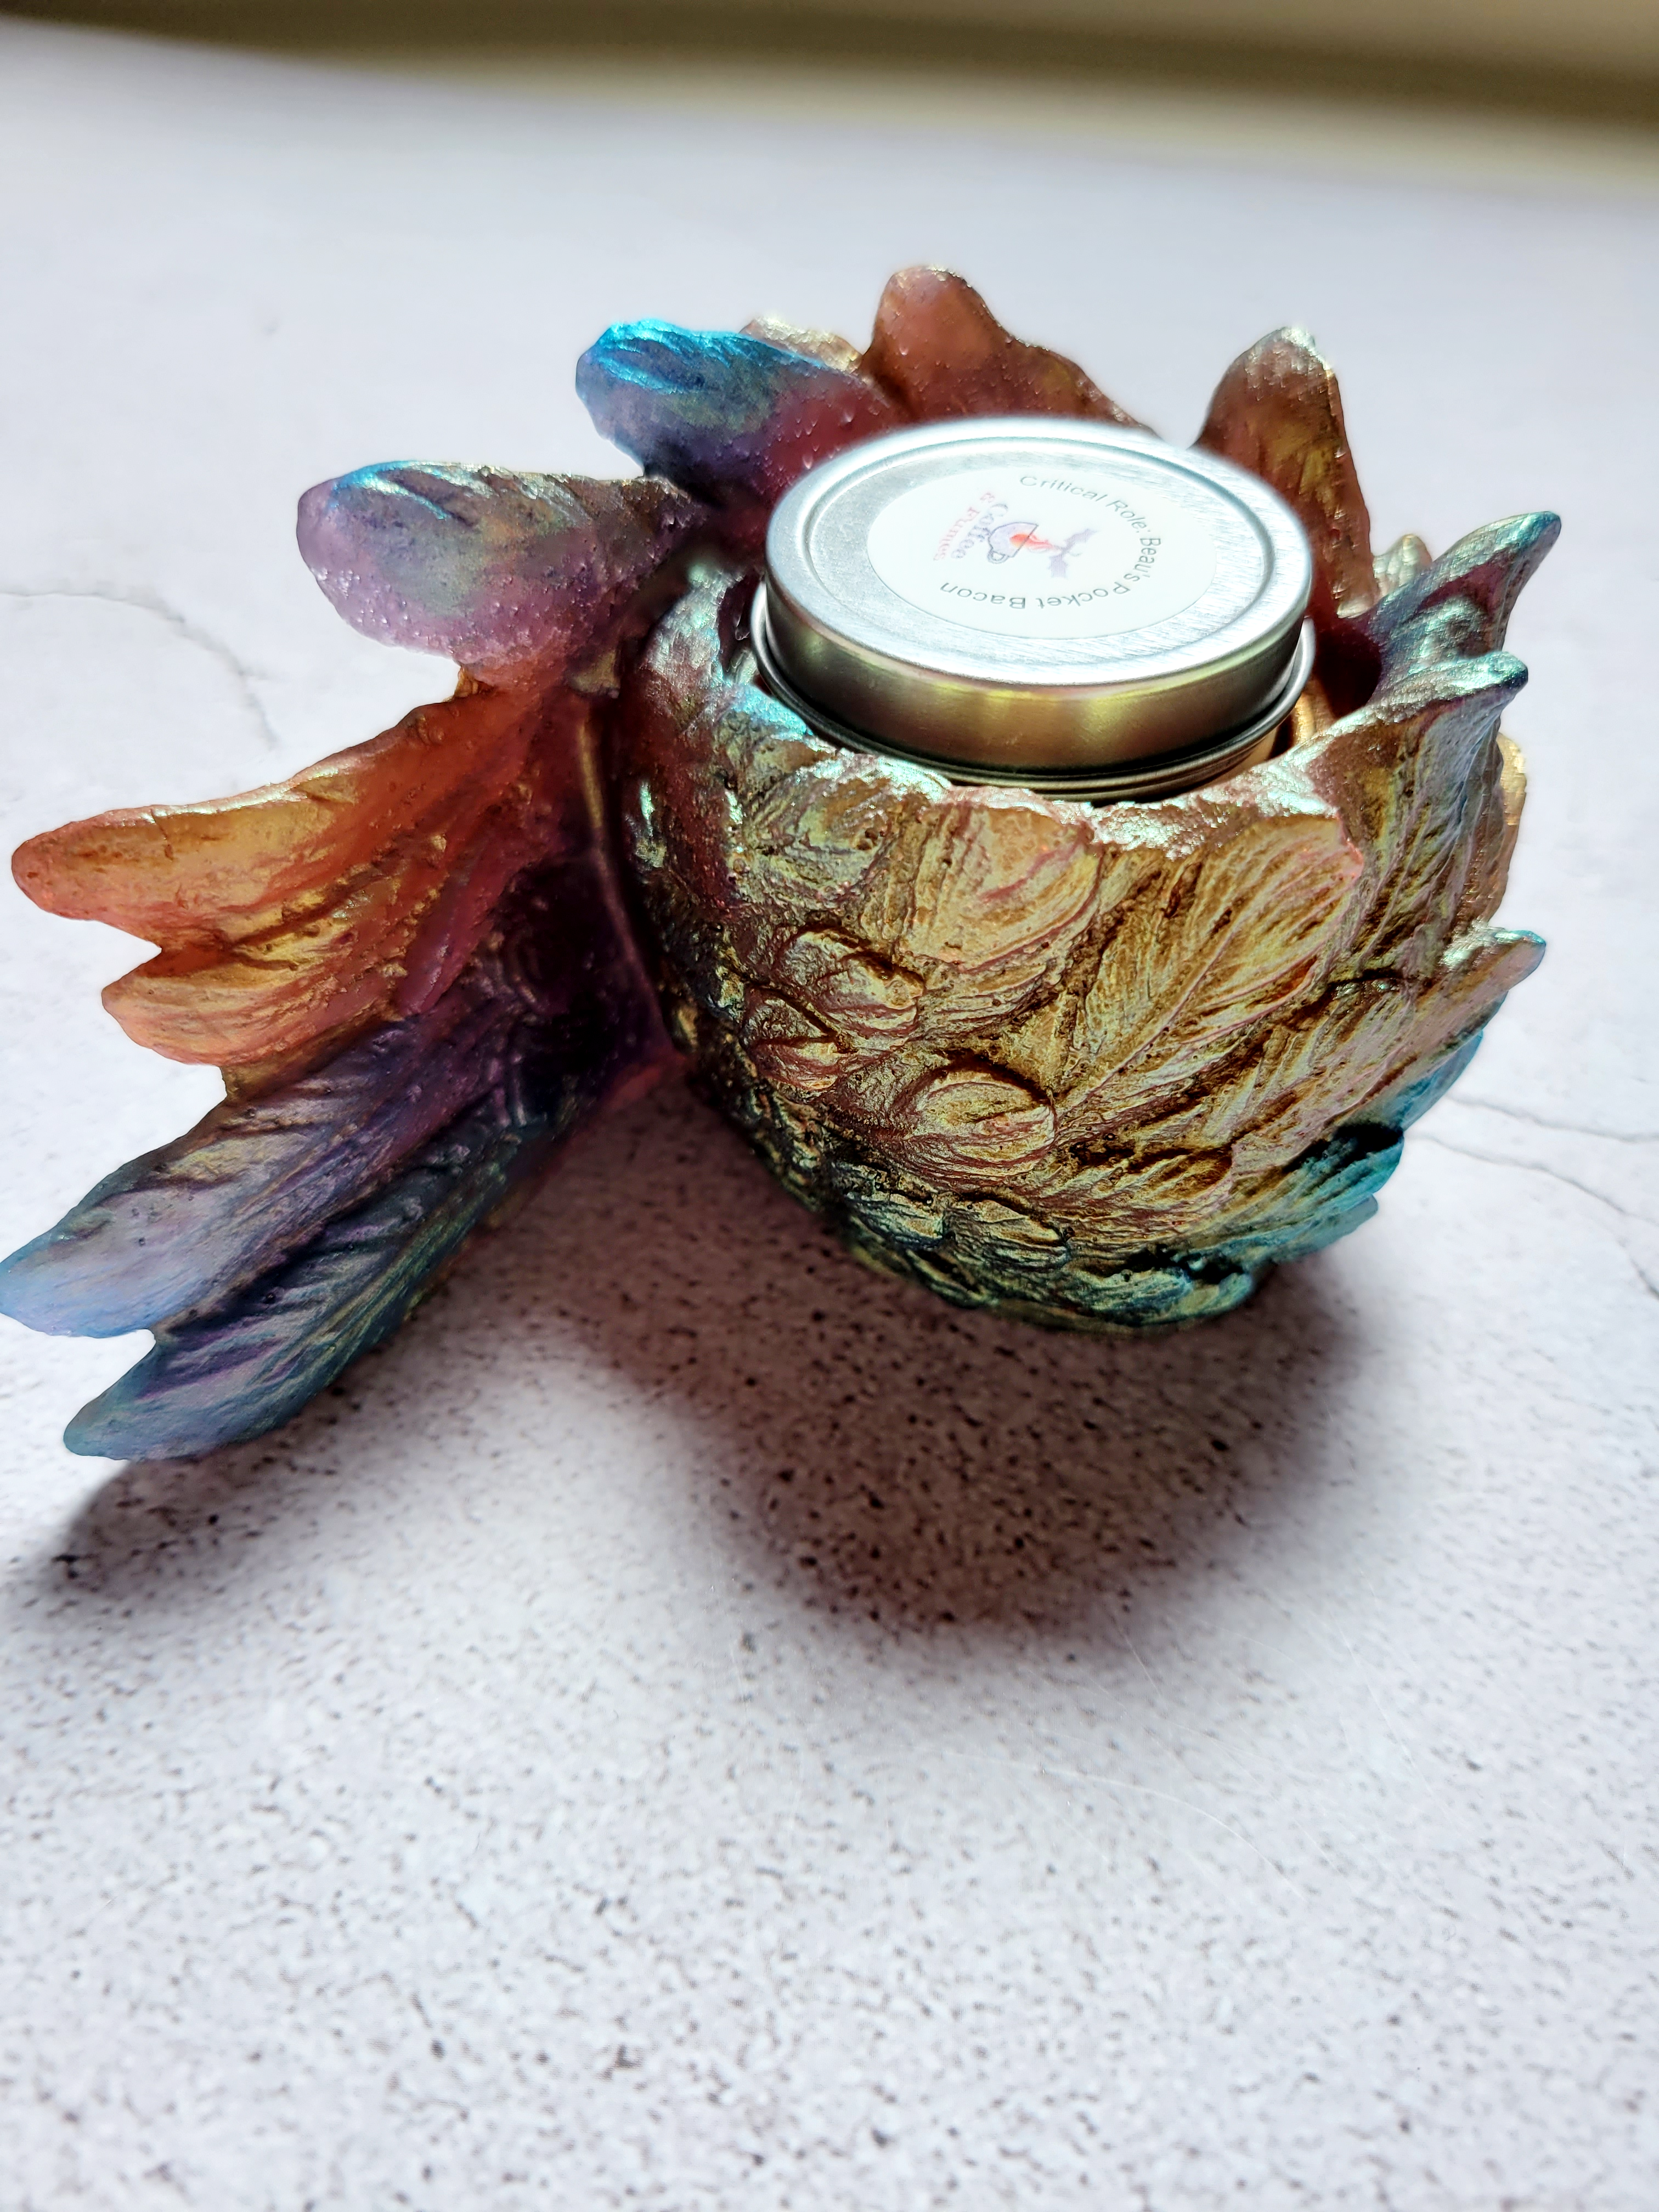 A side view of a tealight candle holder in the style of a bird's wing. It's textured feathers are various colors of blues, oranges, golds, greens. There is a tealight candle inside to show size comparison.